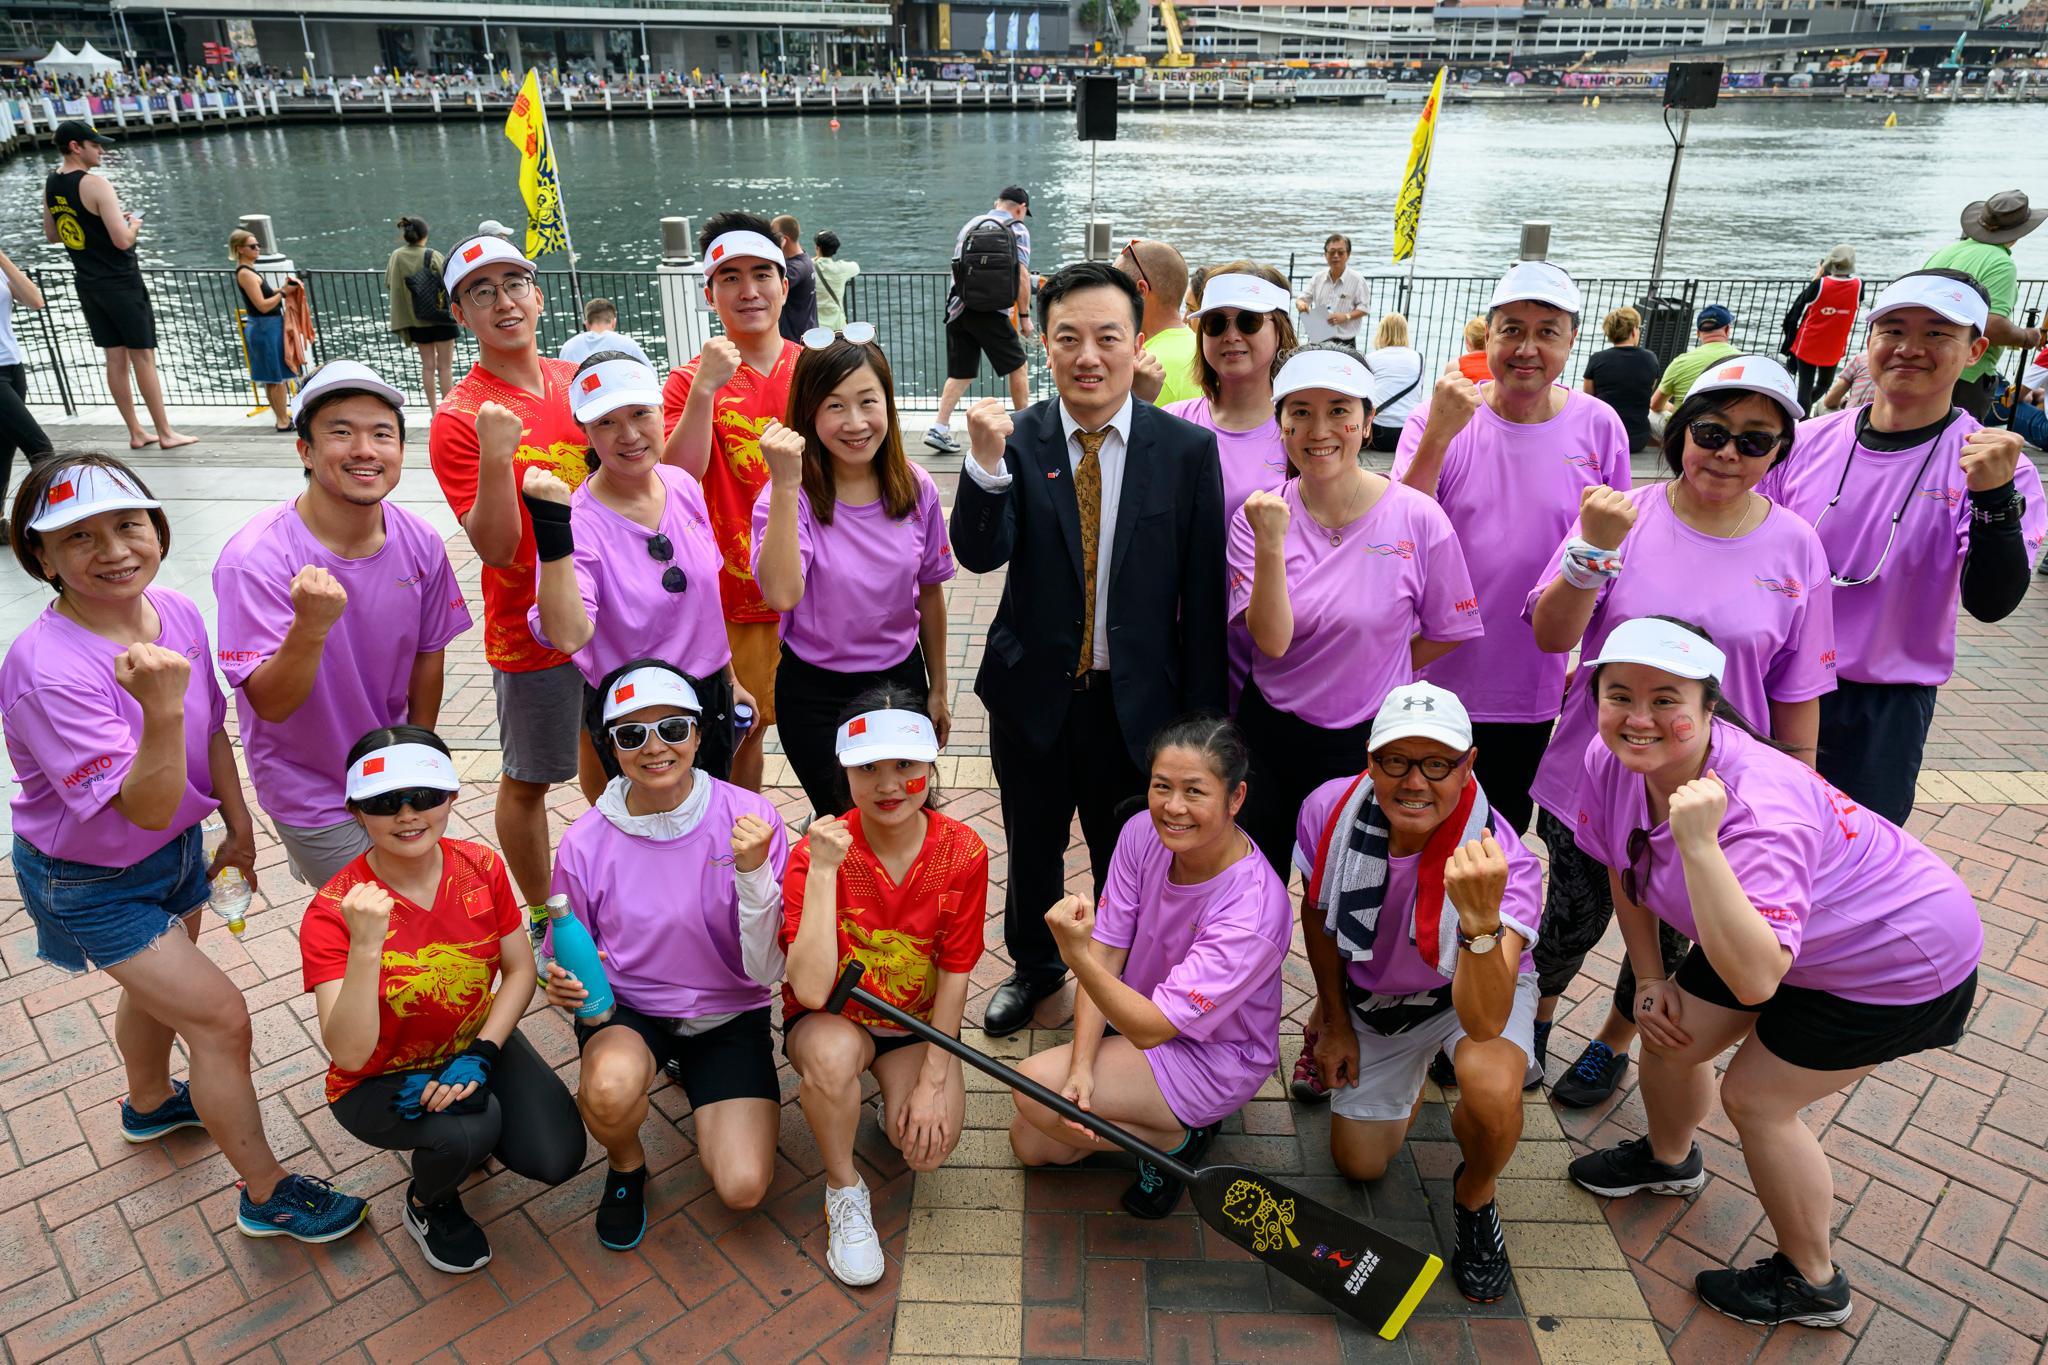 The Hong Kong Economic and Trade Office, Sydney (Sydney ETO) participated in the Sydney Lunar New Year Dragon Boat Festival held in Sydney, Australia, from February 16 to 18. The Acting Consul General of the People's Republic of China in Sydney, Mr Yu Jie (second row, third right), and the Director of the Sydney ETO, Miss Trista Lim (second row, fourth right), cheered on the team on February 16.



